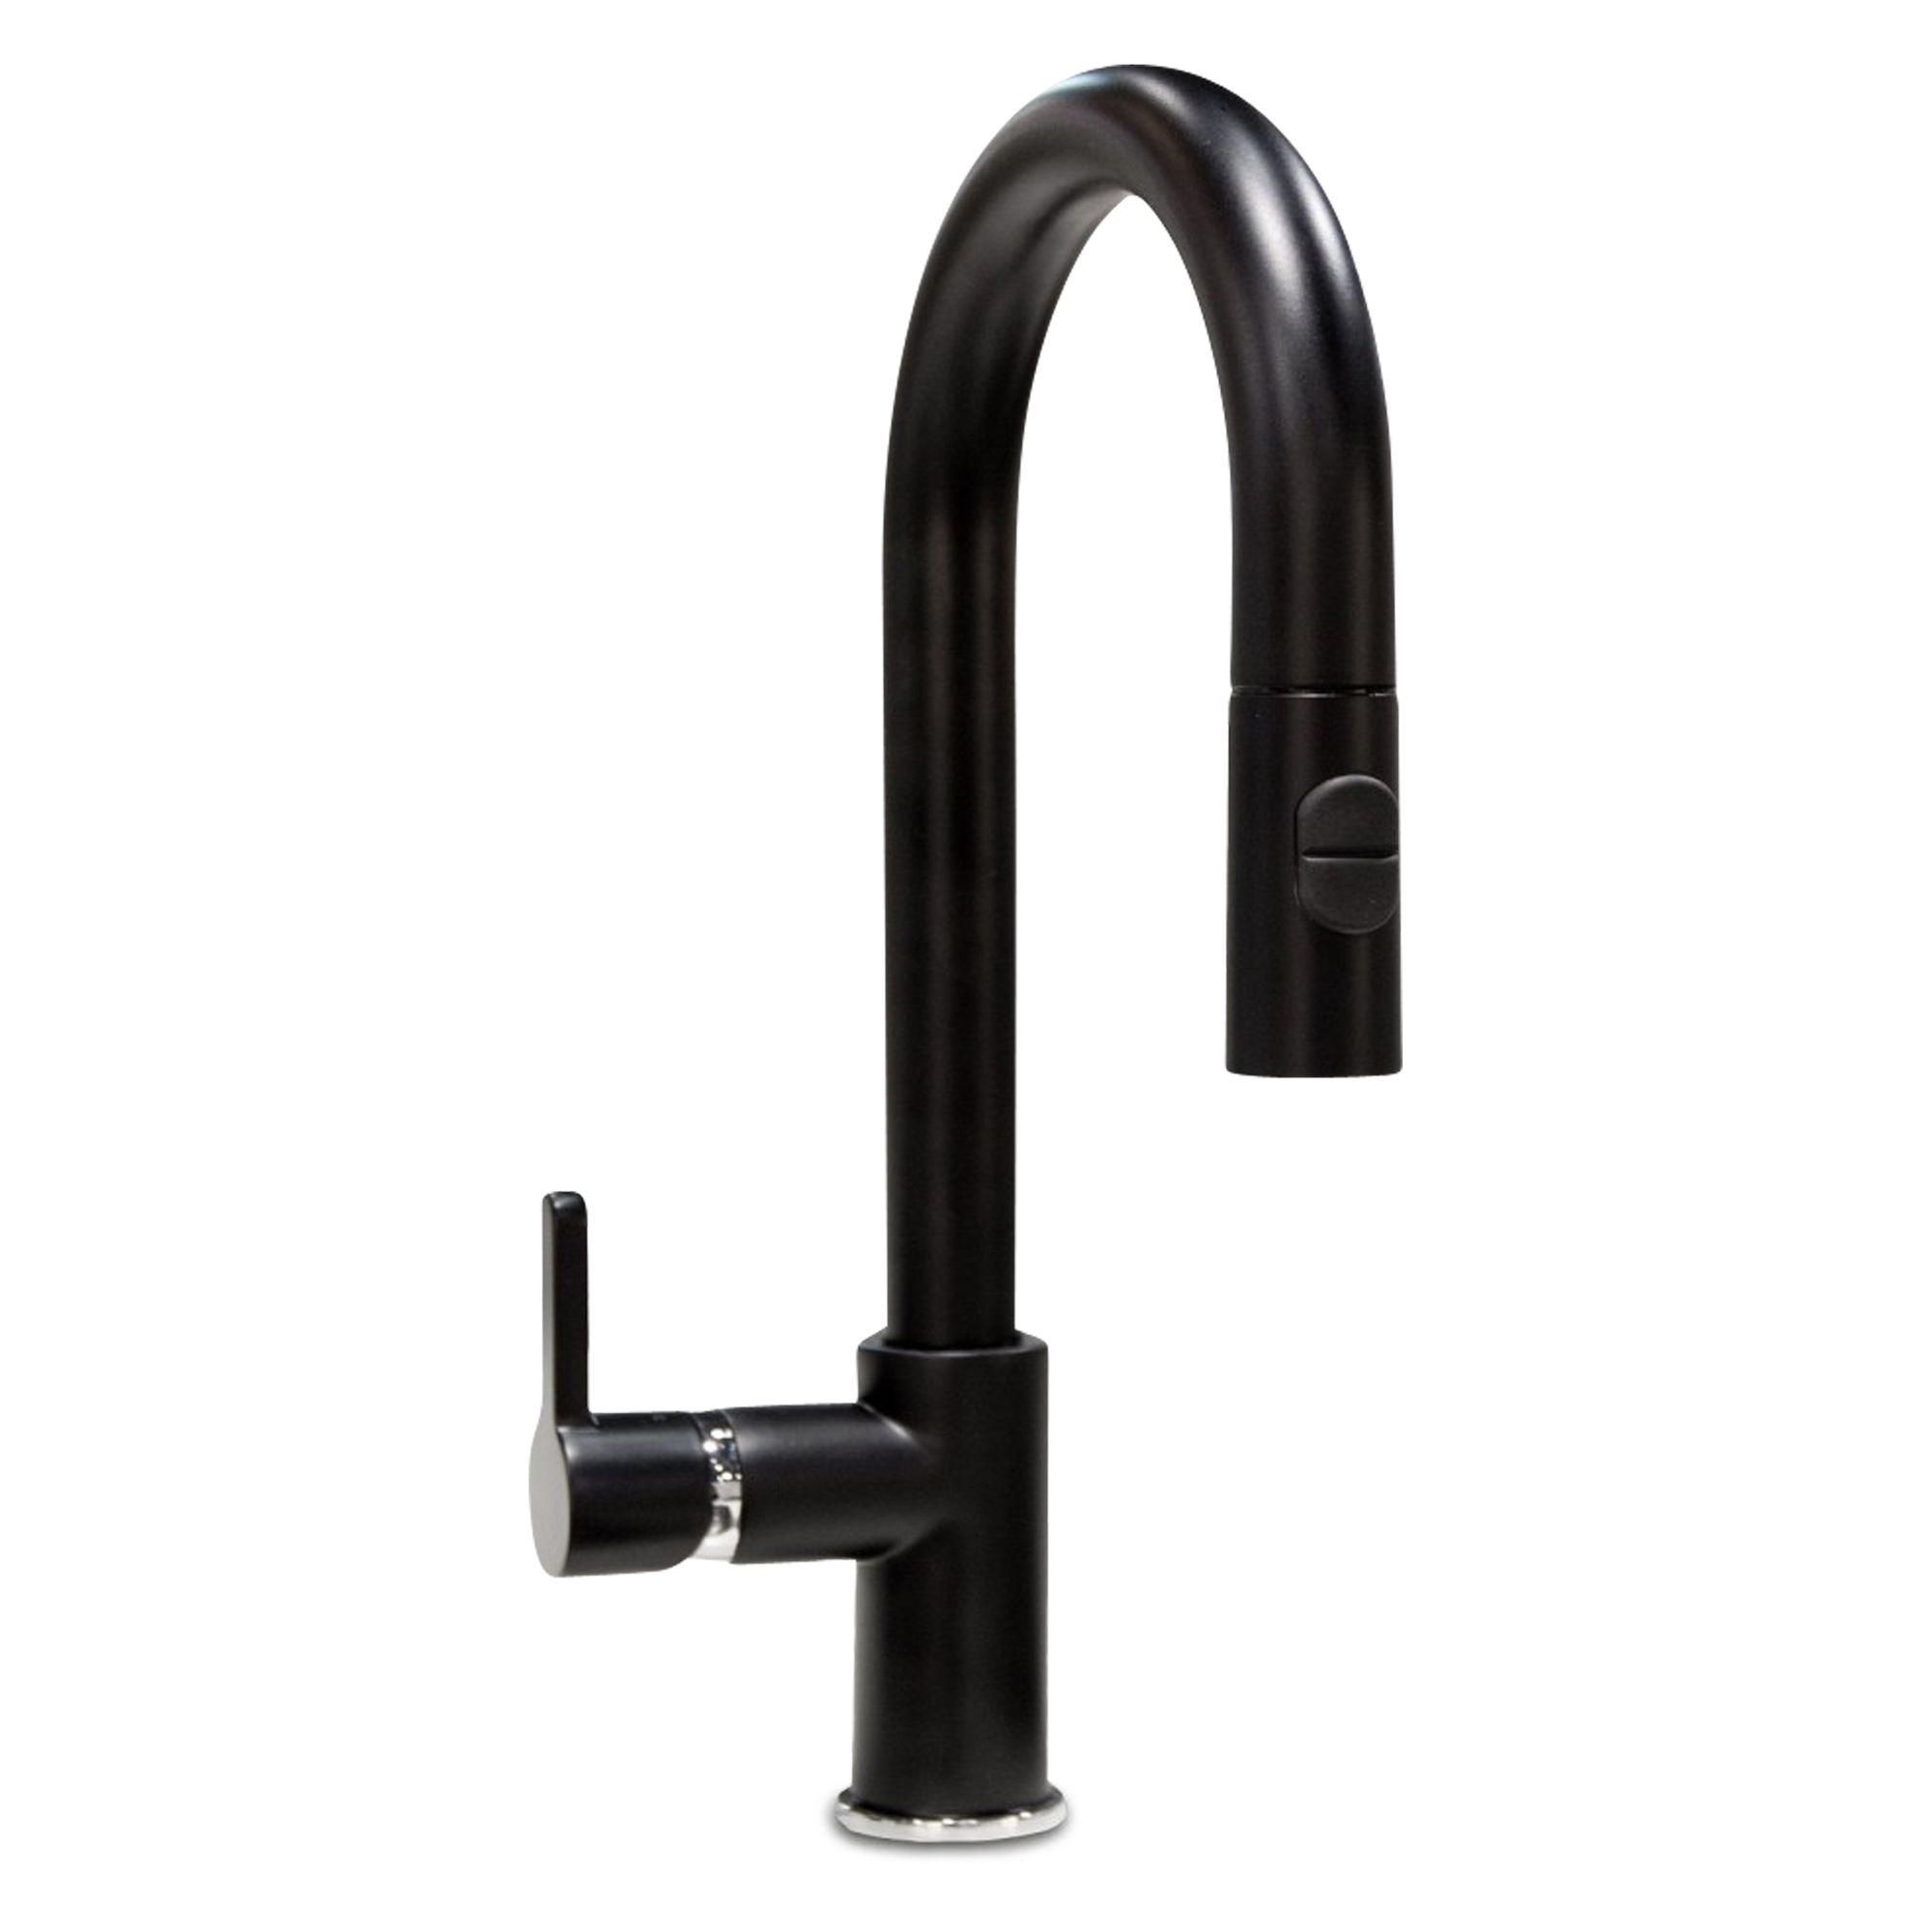 The Kelly 2 Faucet (Pull-Down) is a single hole kitchen faucet with one lever and a pull-down spray.